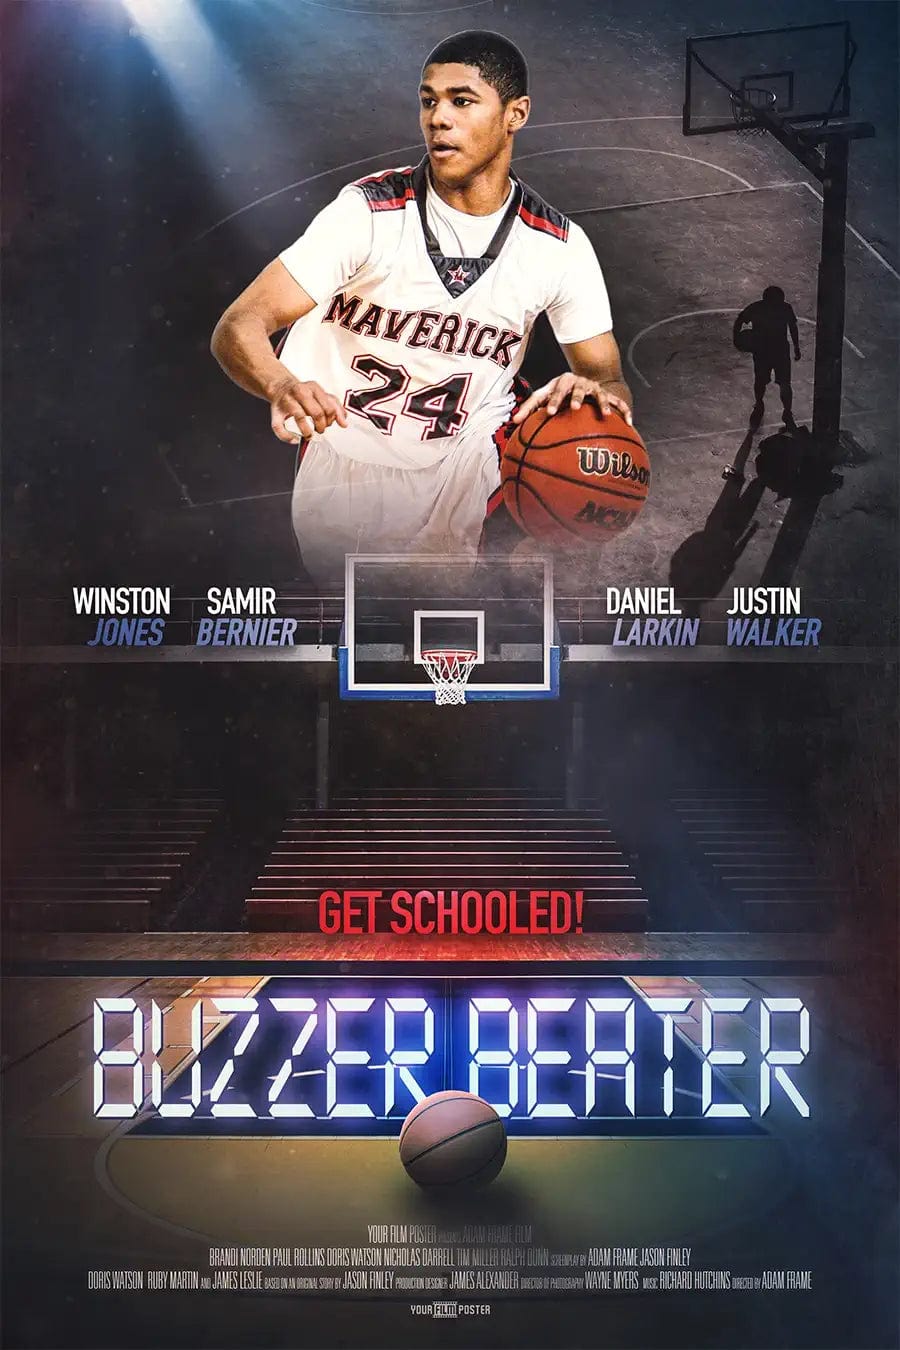 Basketball movie poster with your own photo and titles! This example shows a dark basketball field and a young man dribbling